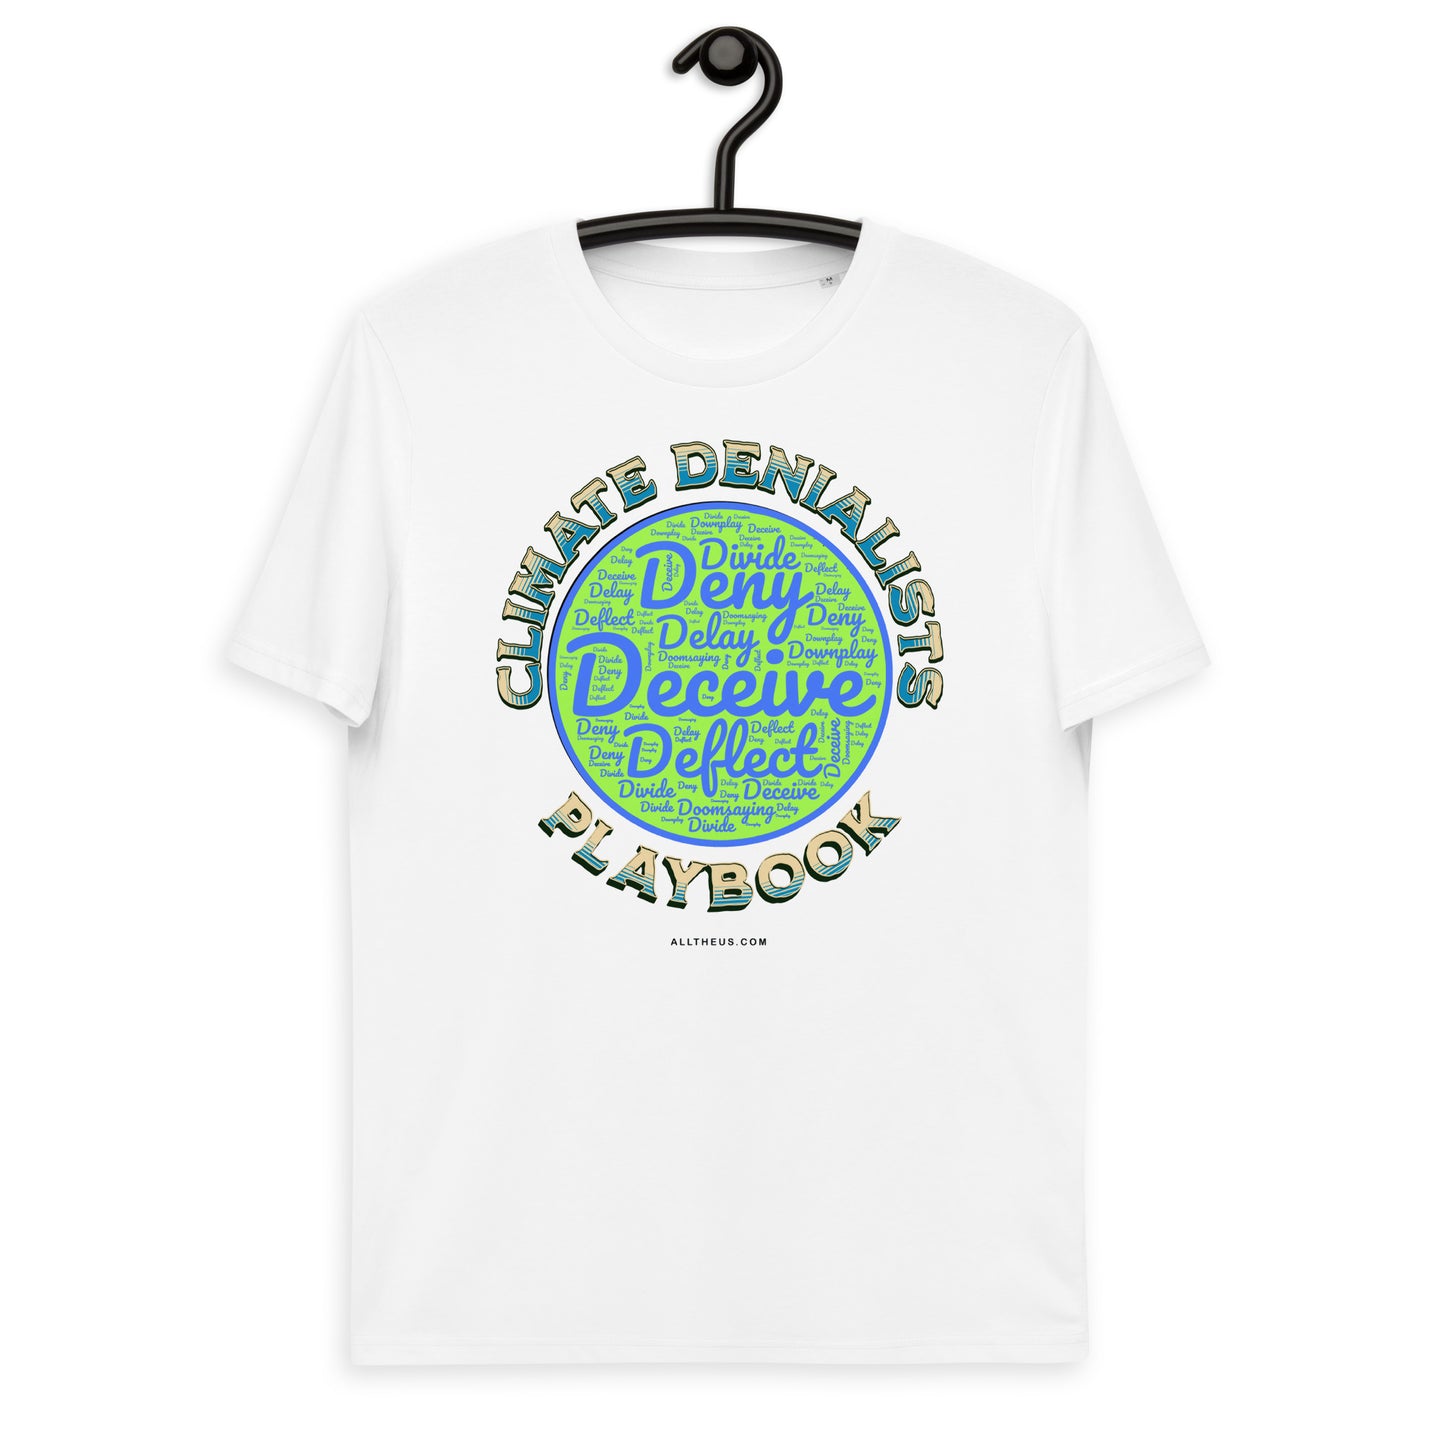 Unisex organic cotton t-shirt - Be Wild About the Climate Change Denialists Playbook